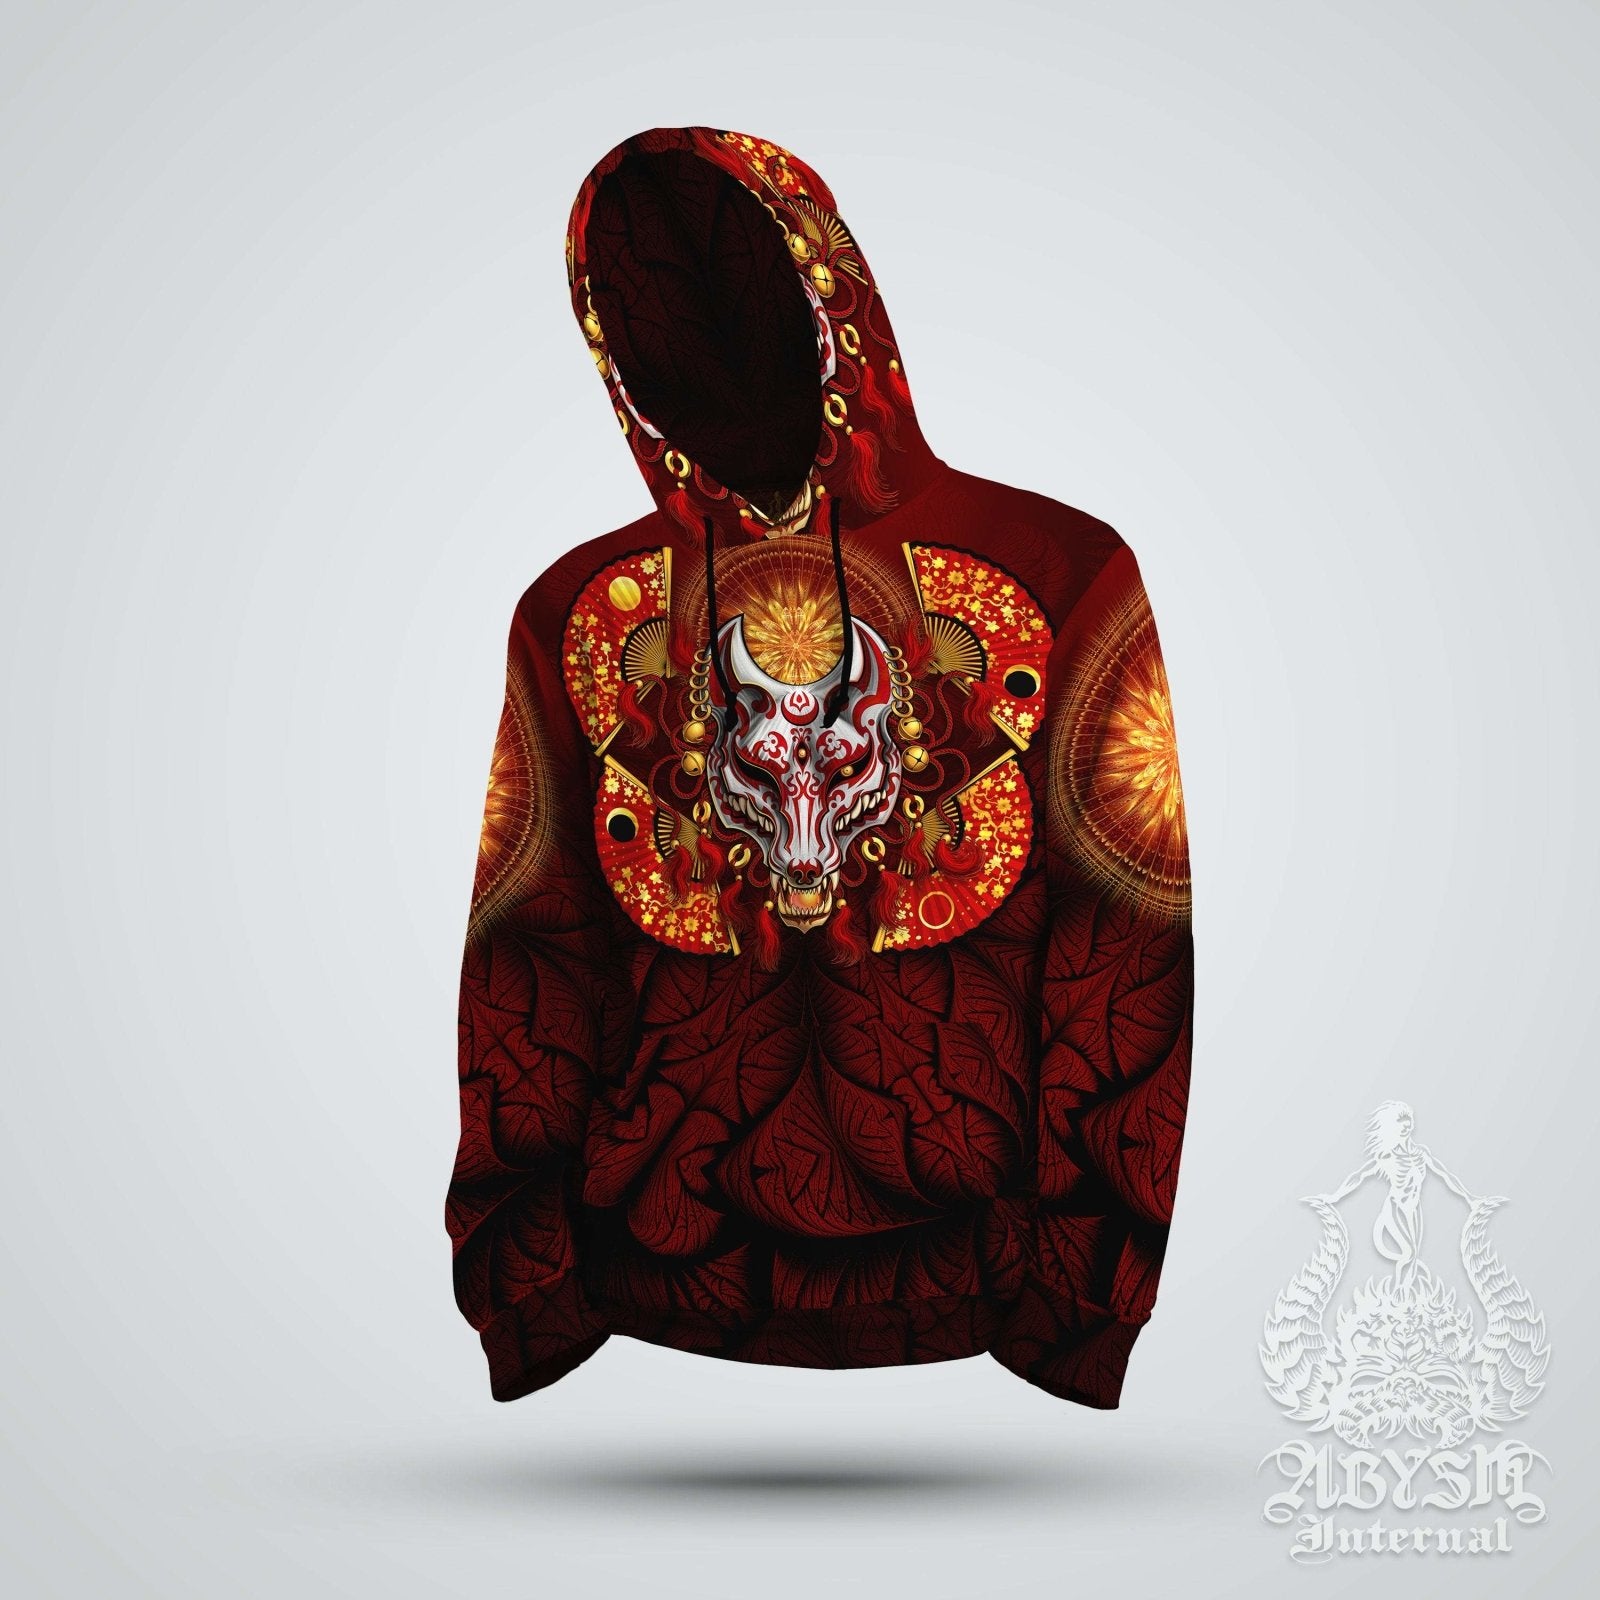 Anime Hoodie, Street Outfit, Japanese Streetwear, Gamer Apparel, Alternative Clothing, Unisex - Fox or Kitsune Mask, Red and White - Abysm Internal